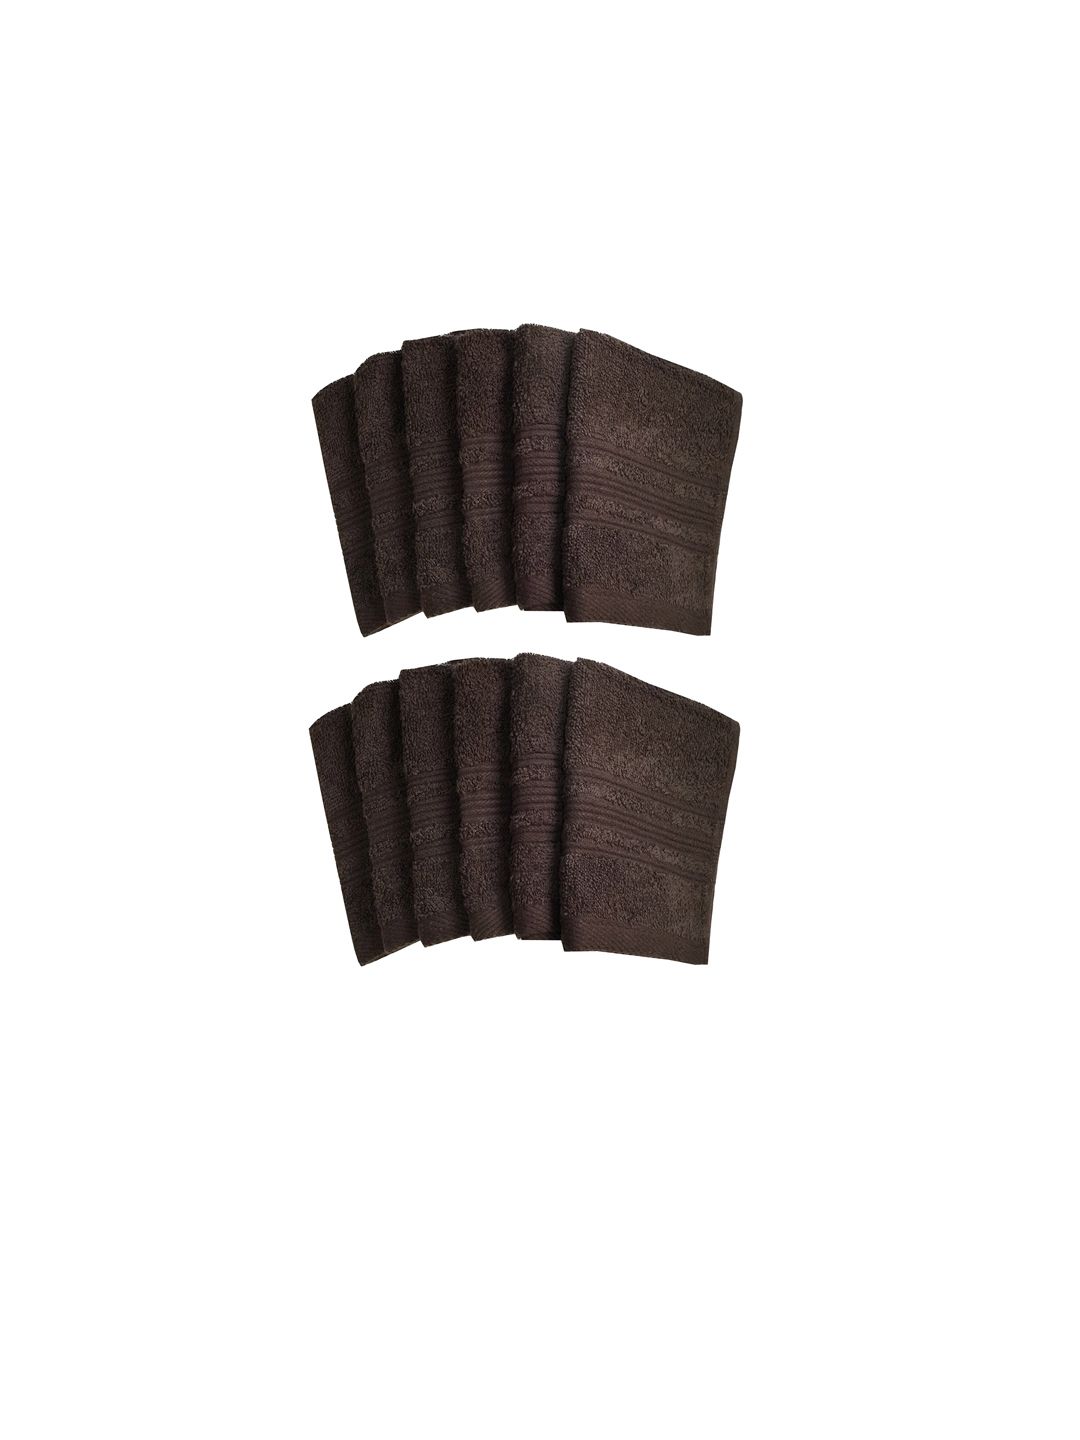 Lushomes Set of 12 Coffee Brown Solid 450 GSM Cotton Hand Towels Price in India